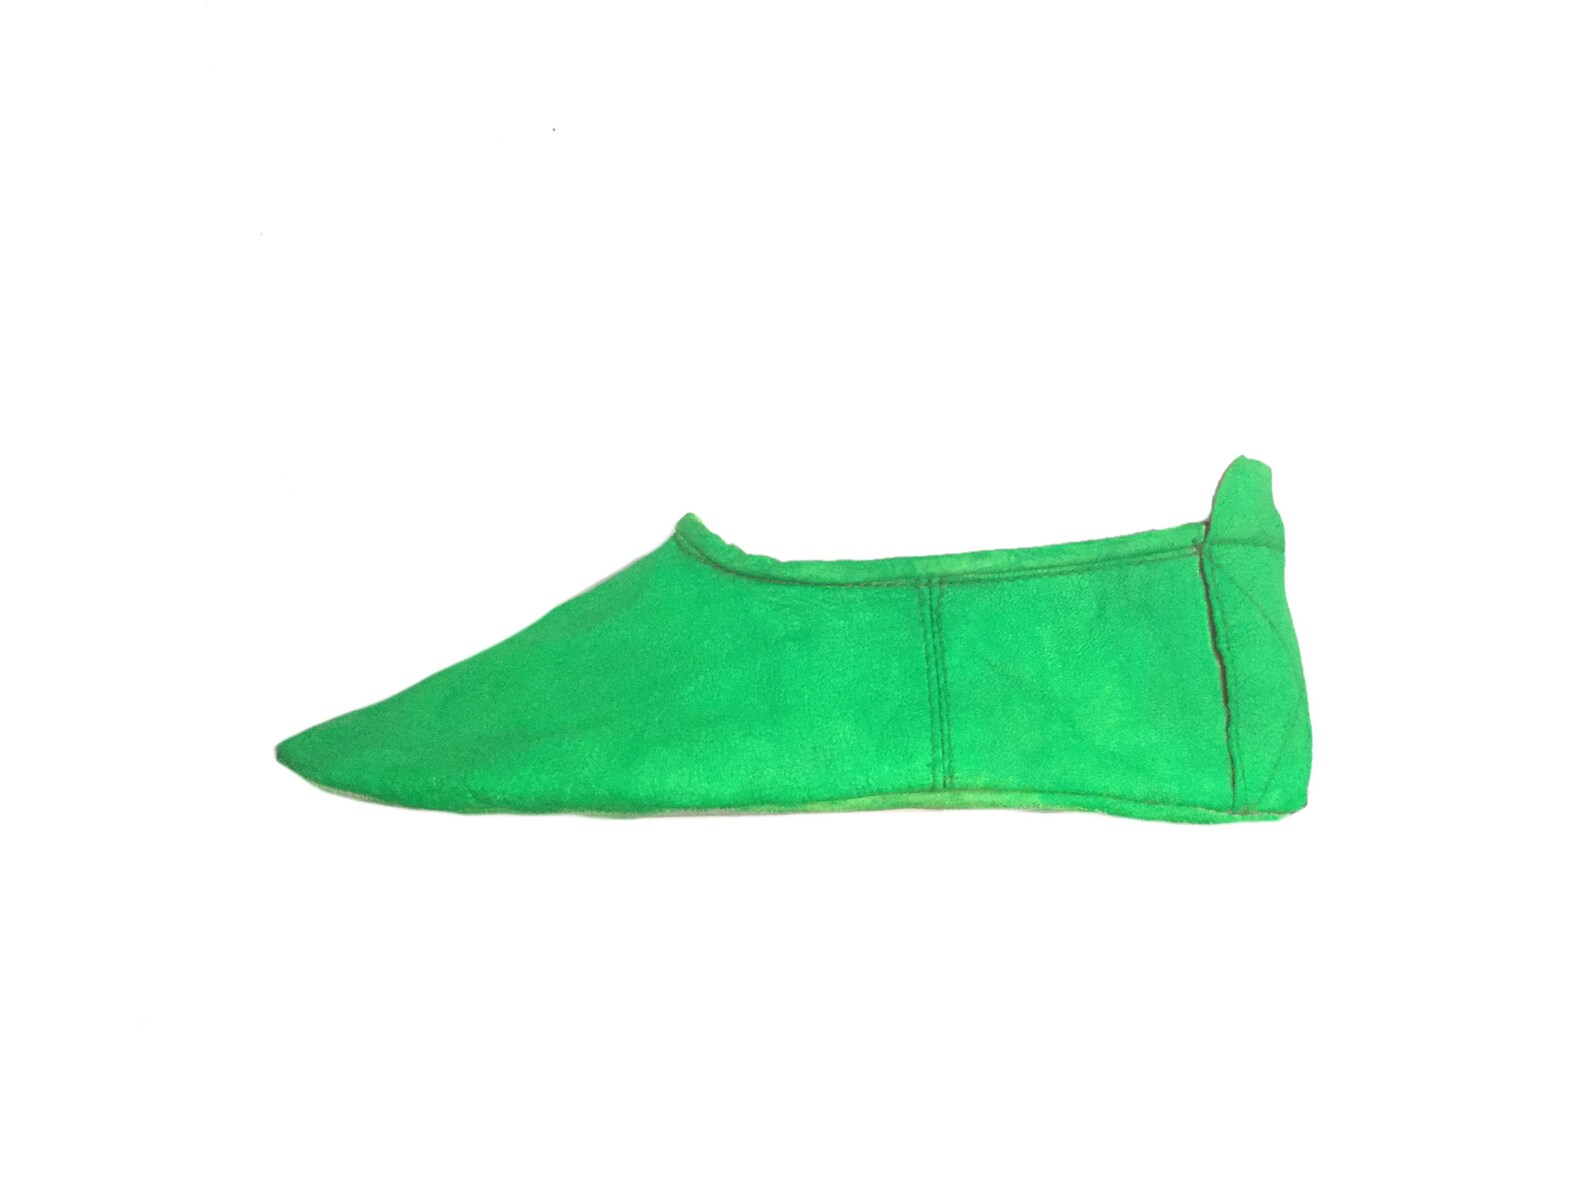 earthing shoes,barefoot shoes,glove shoes,leather slippers,leather travel shoes, tabi socks ,ballet flats,(neon green)